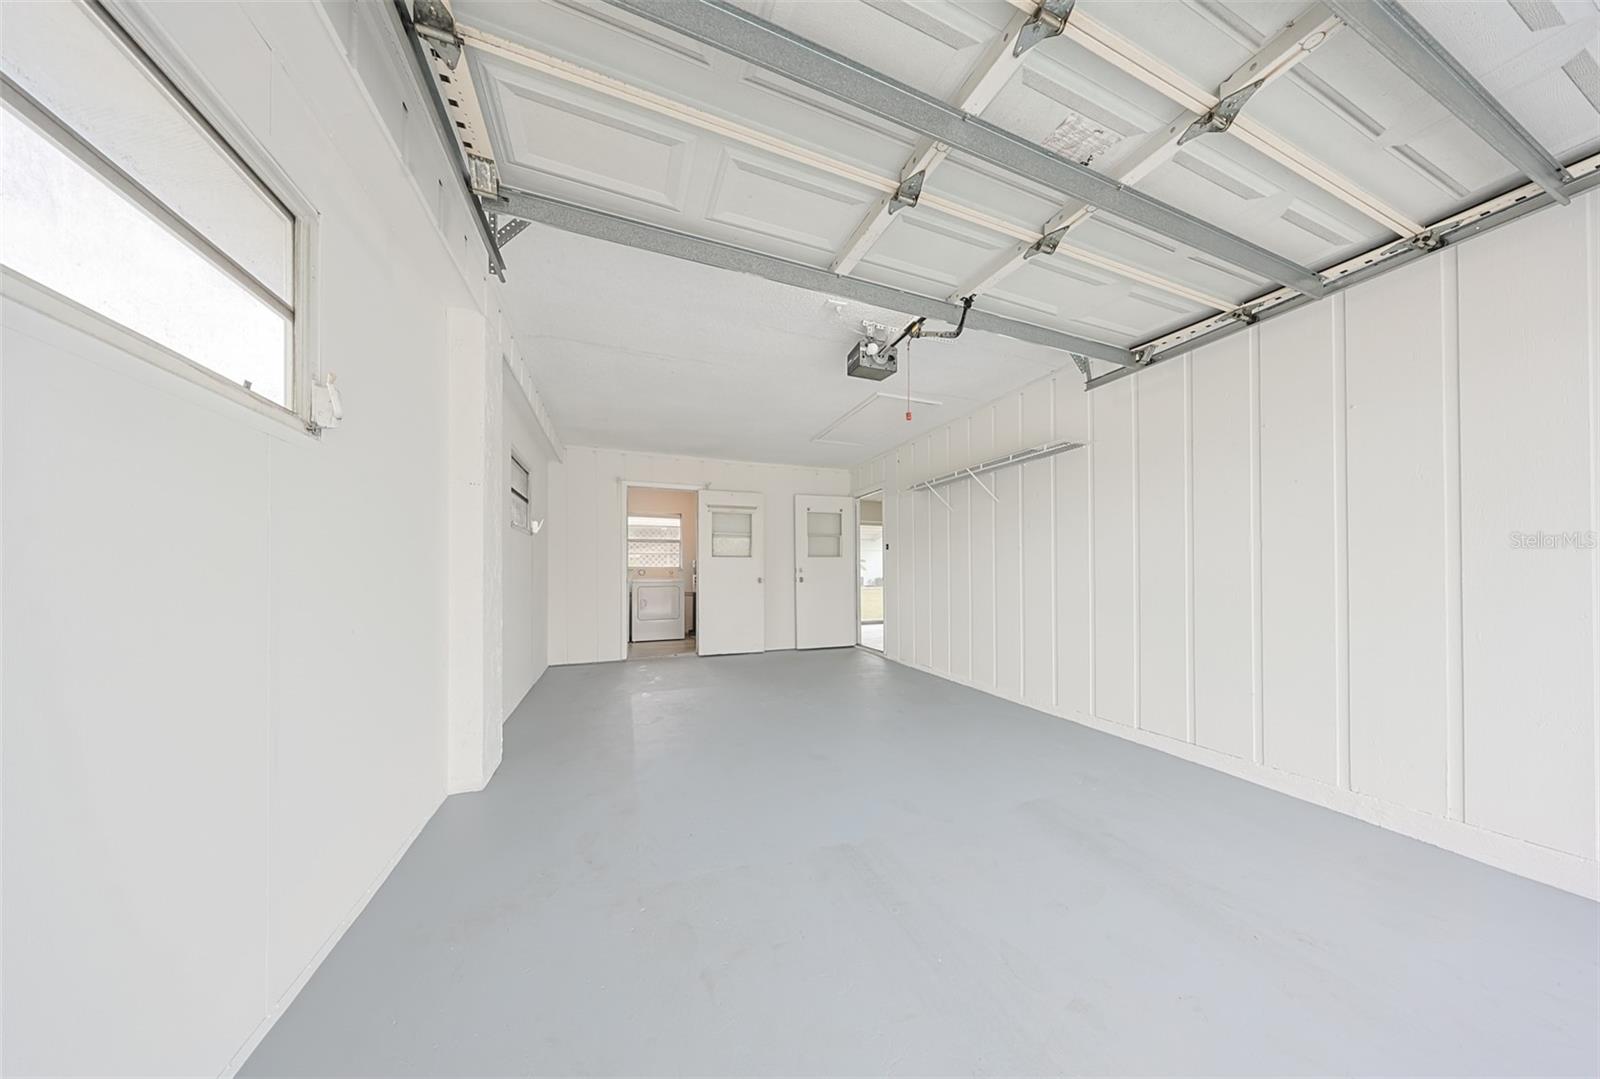 Garage, recently painted with newly applied epoxy floor finish and automatic door opener